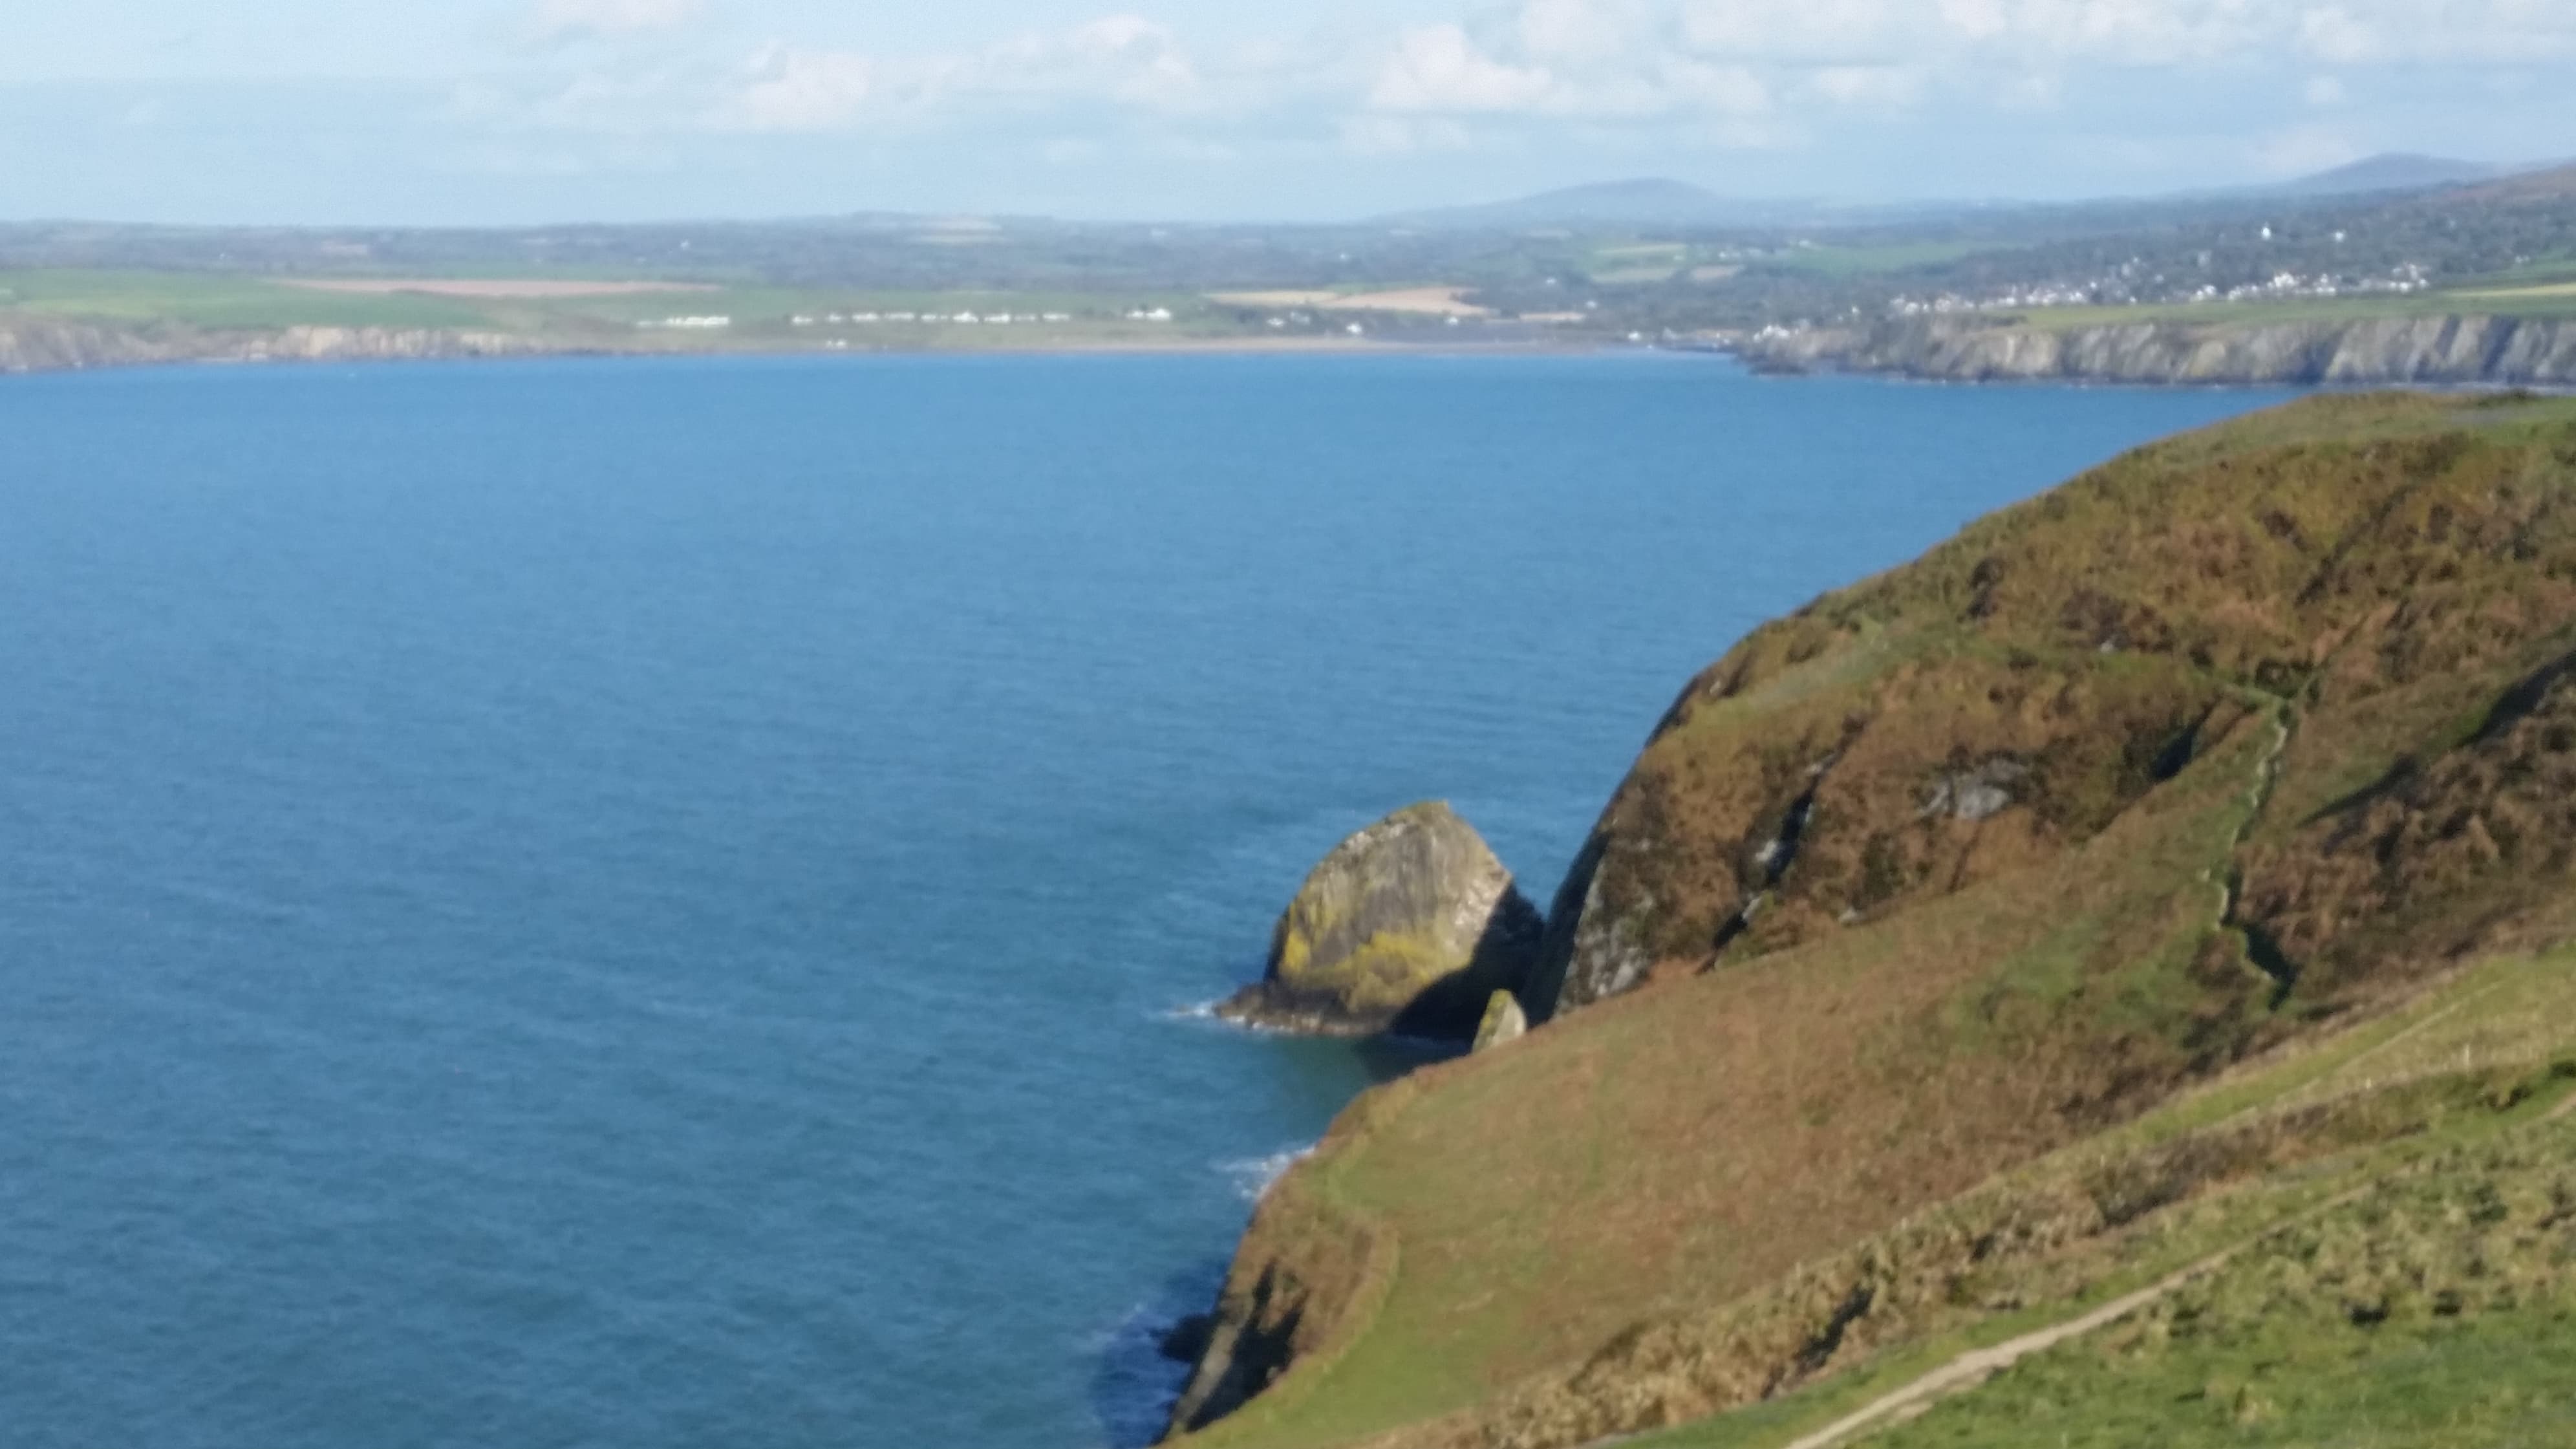 Stunning view across Cardigan Bay from Dinas Head cliff footpath